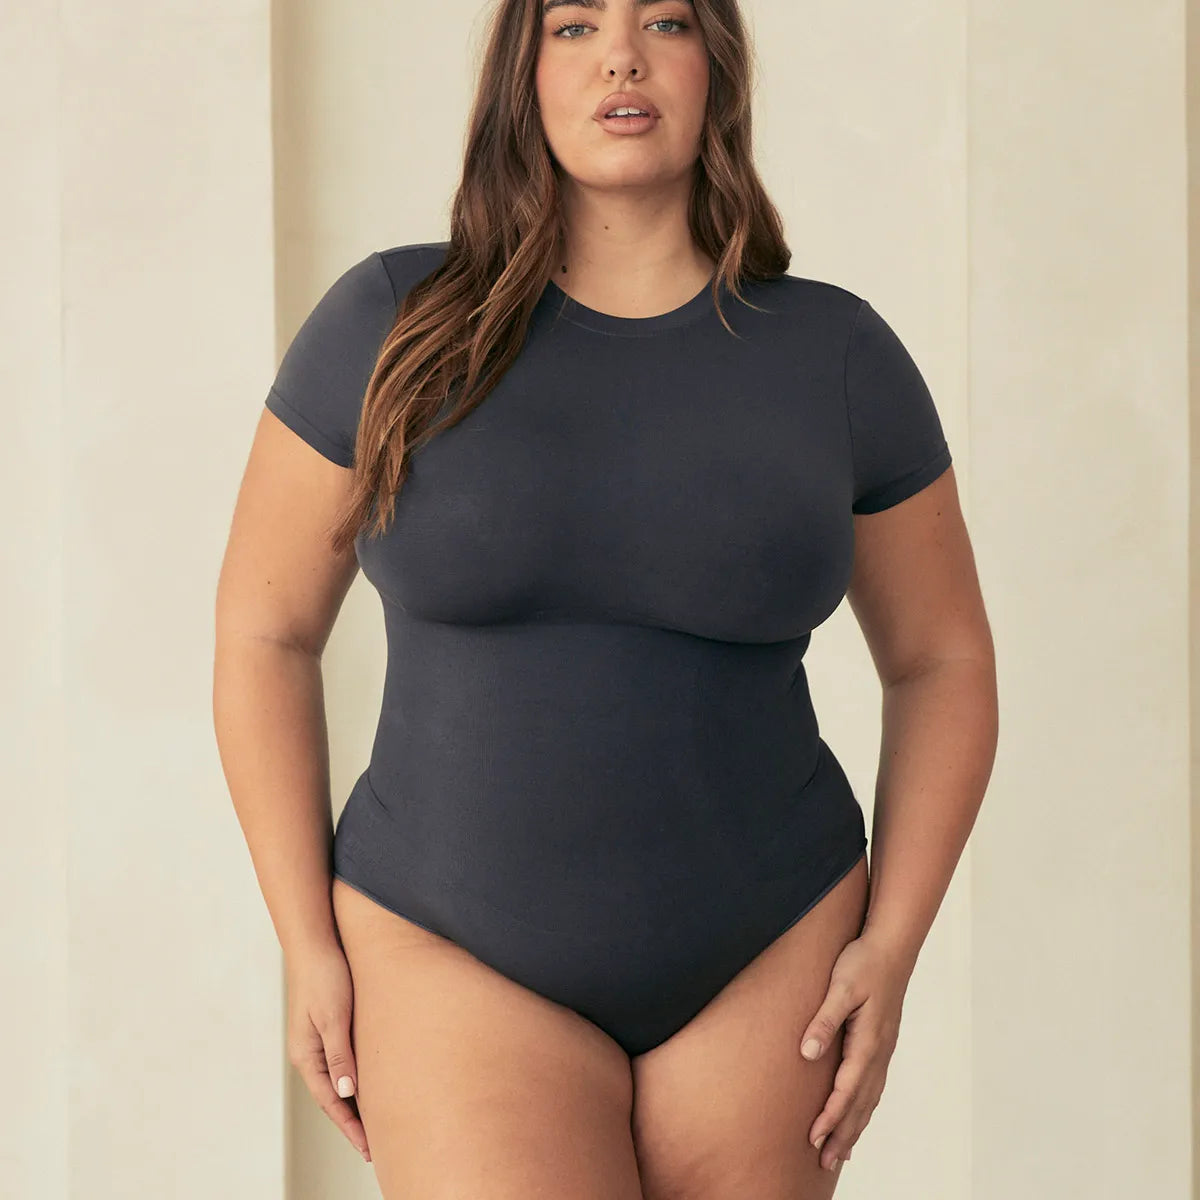 I'm telling you, this @Pinsy Shapewear bodysuit is unmatched. And